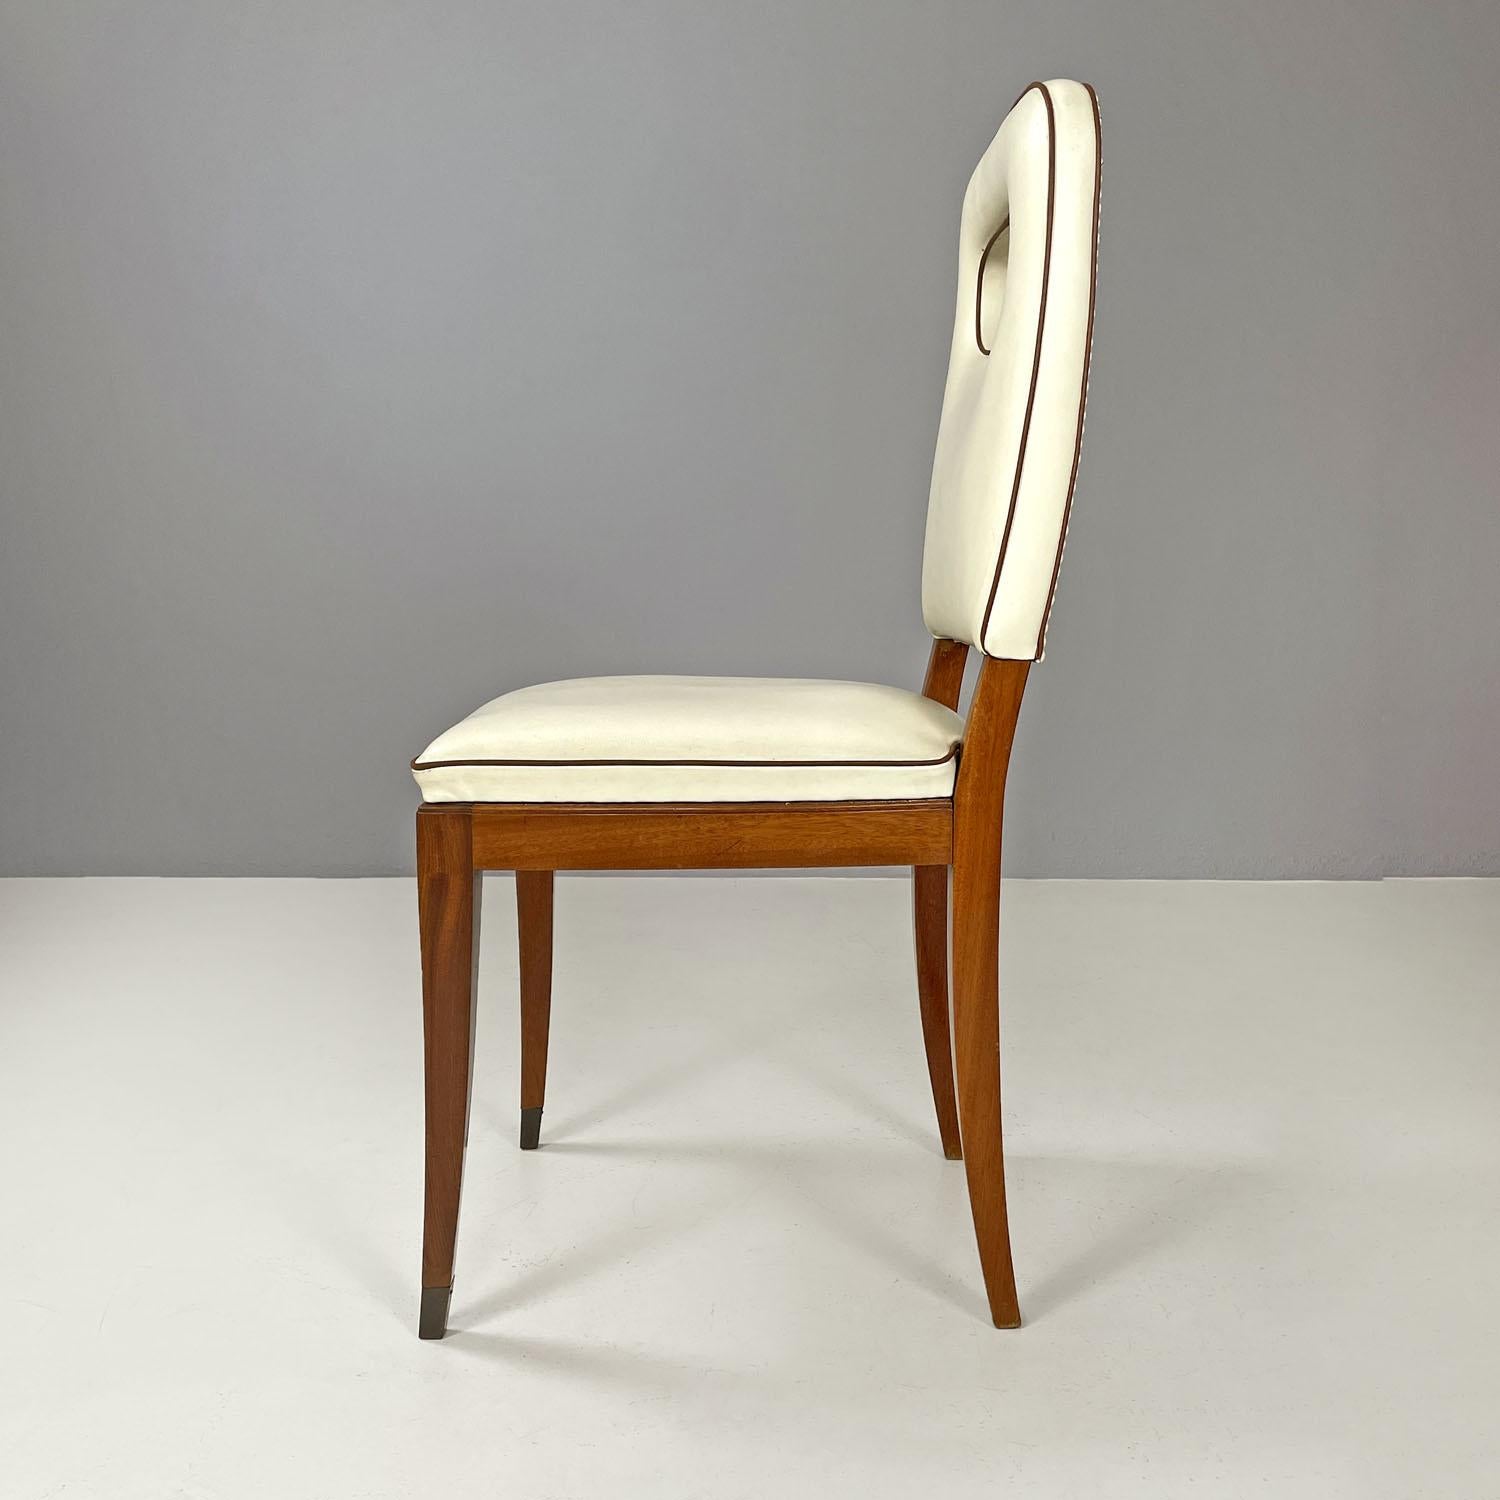 Mid-20th Century Italian Art Deco white leather and wood chairs by Giovanni Gariboldi, 1940s For Sale